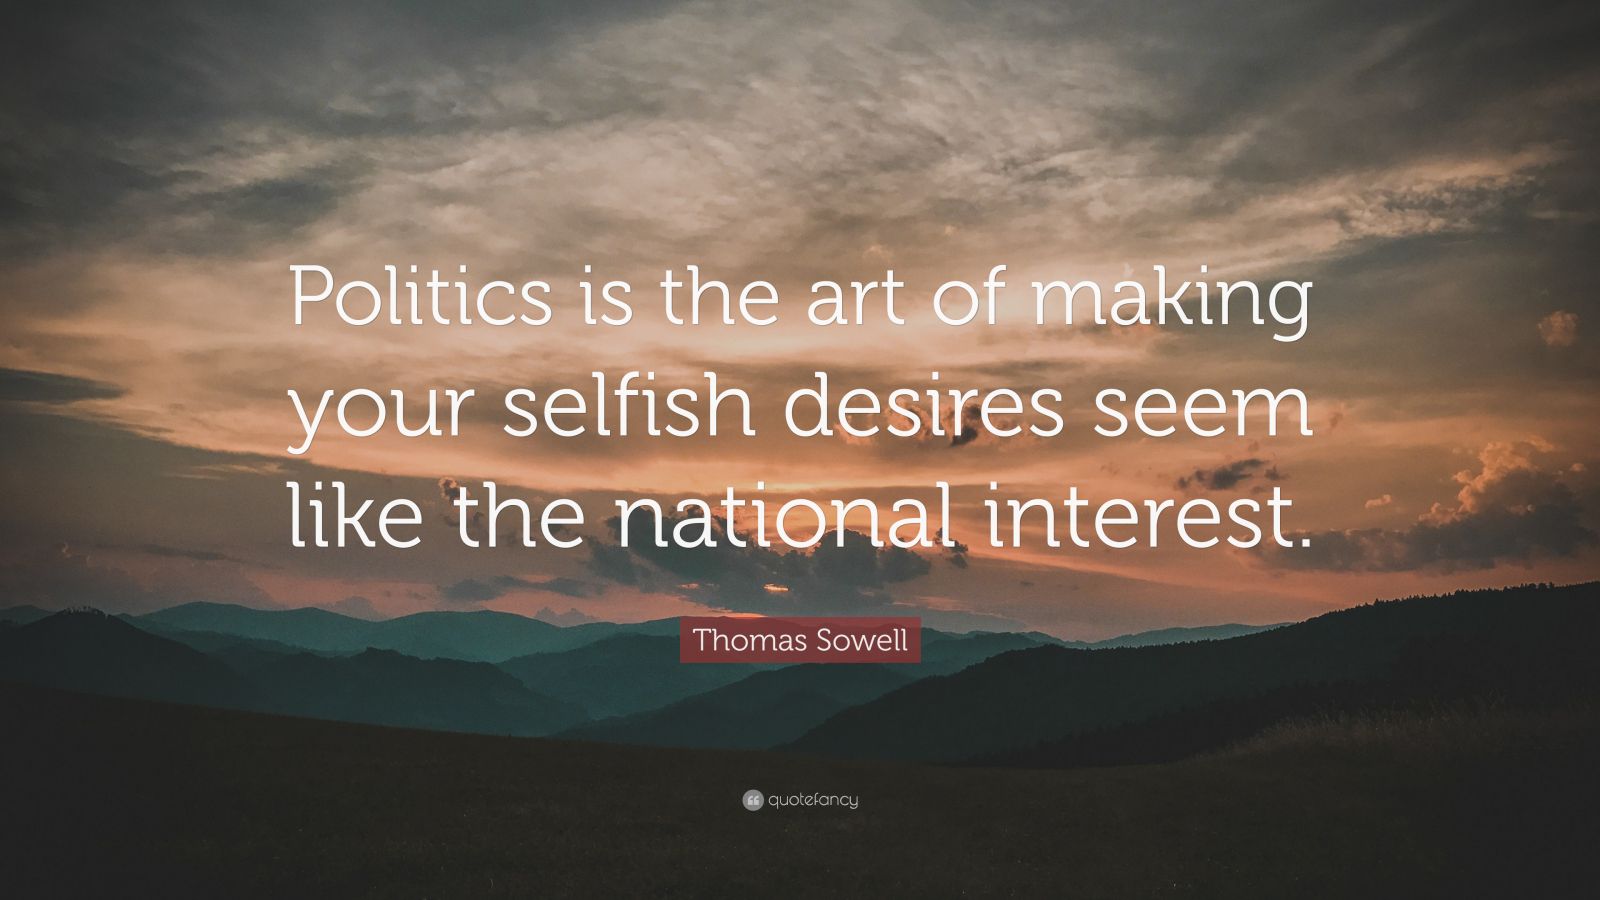 4776475-Thomas-Sowell-Quote-Politics-is-the-art-of-making-your-selfish.jpg